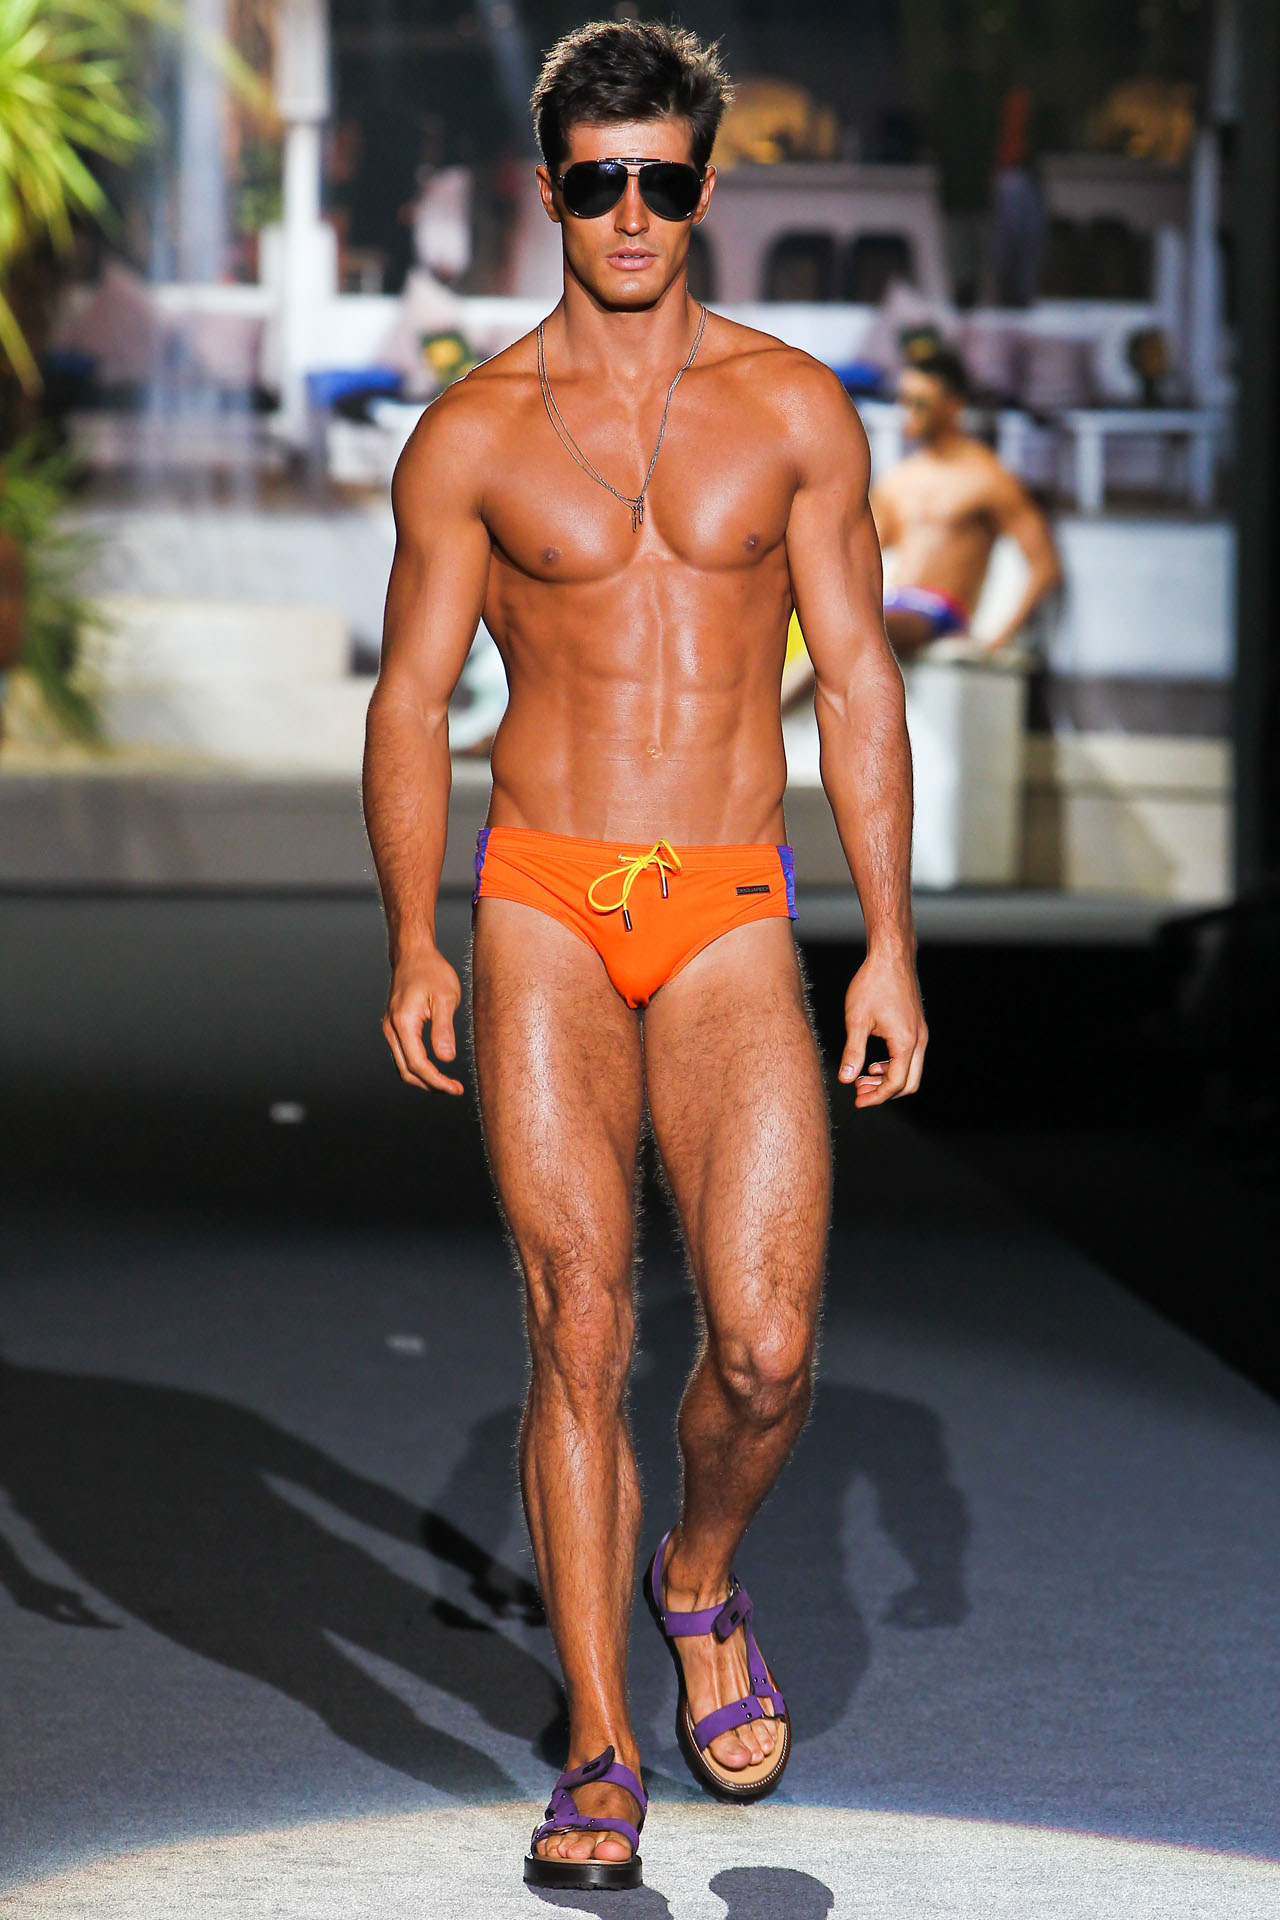 Diego Miguel | Menswear, Men's swimsuits, Bright swimsuit